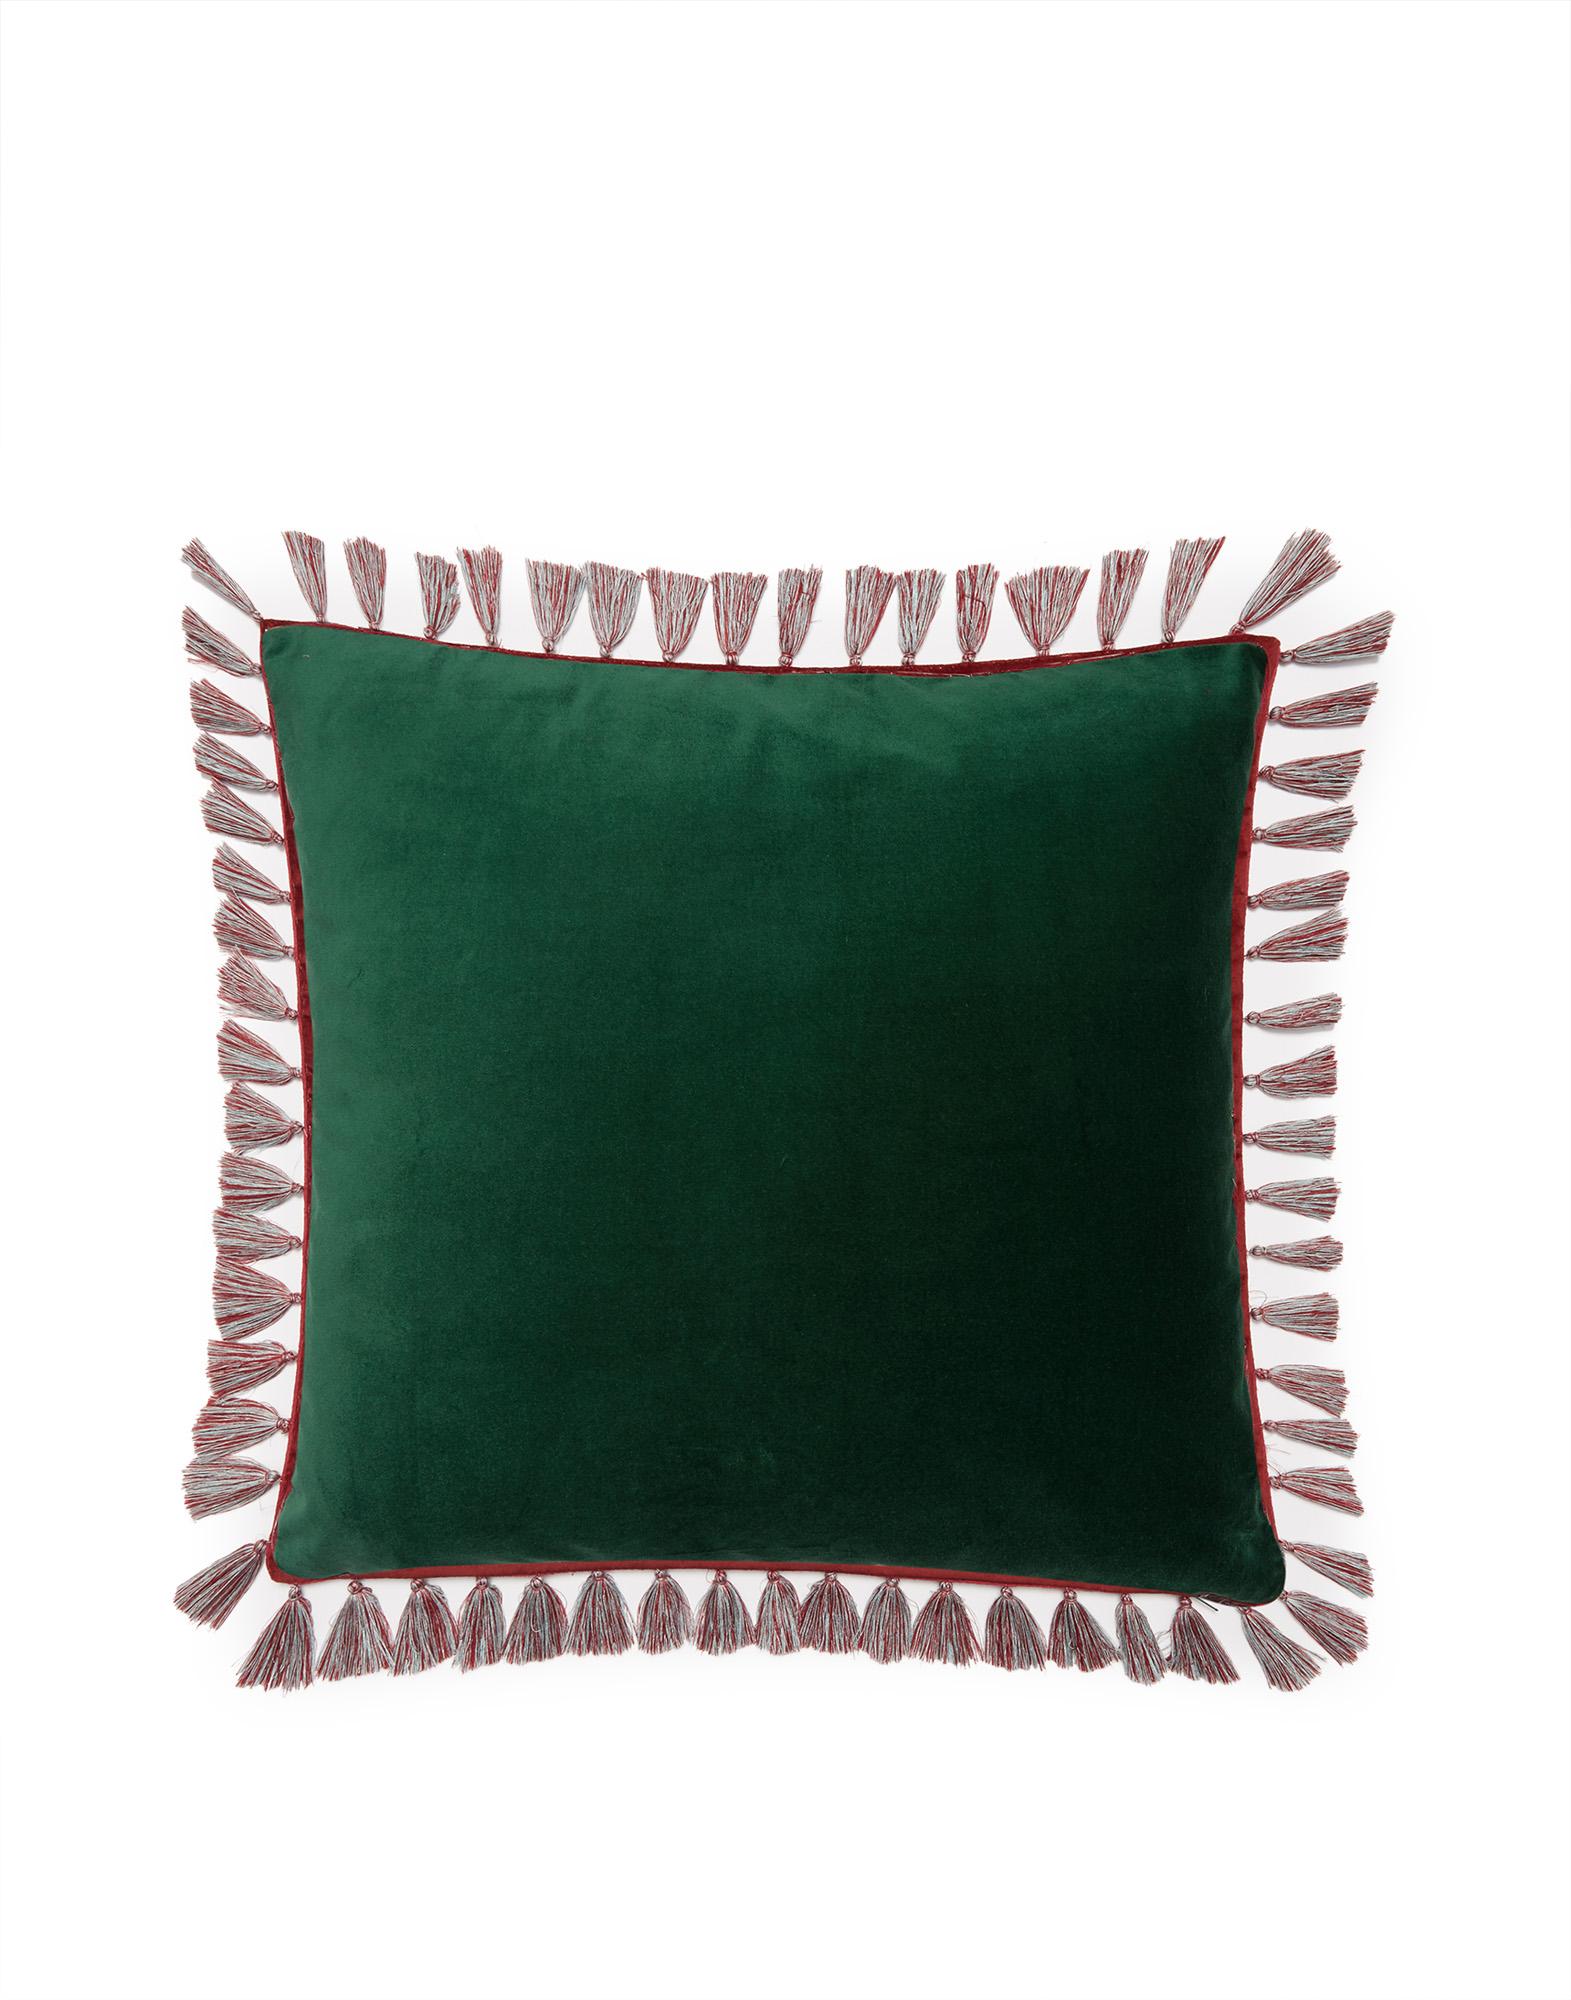 Let this luxurious Italian-made spirit animal cushion cover brighten your couch and uplift your soul. With a silky fringe tassel trim, it features a forest-dwelling deer - symbolizing grace, compassion, gentleness, meekness and natural beauty -